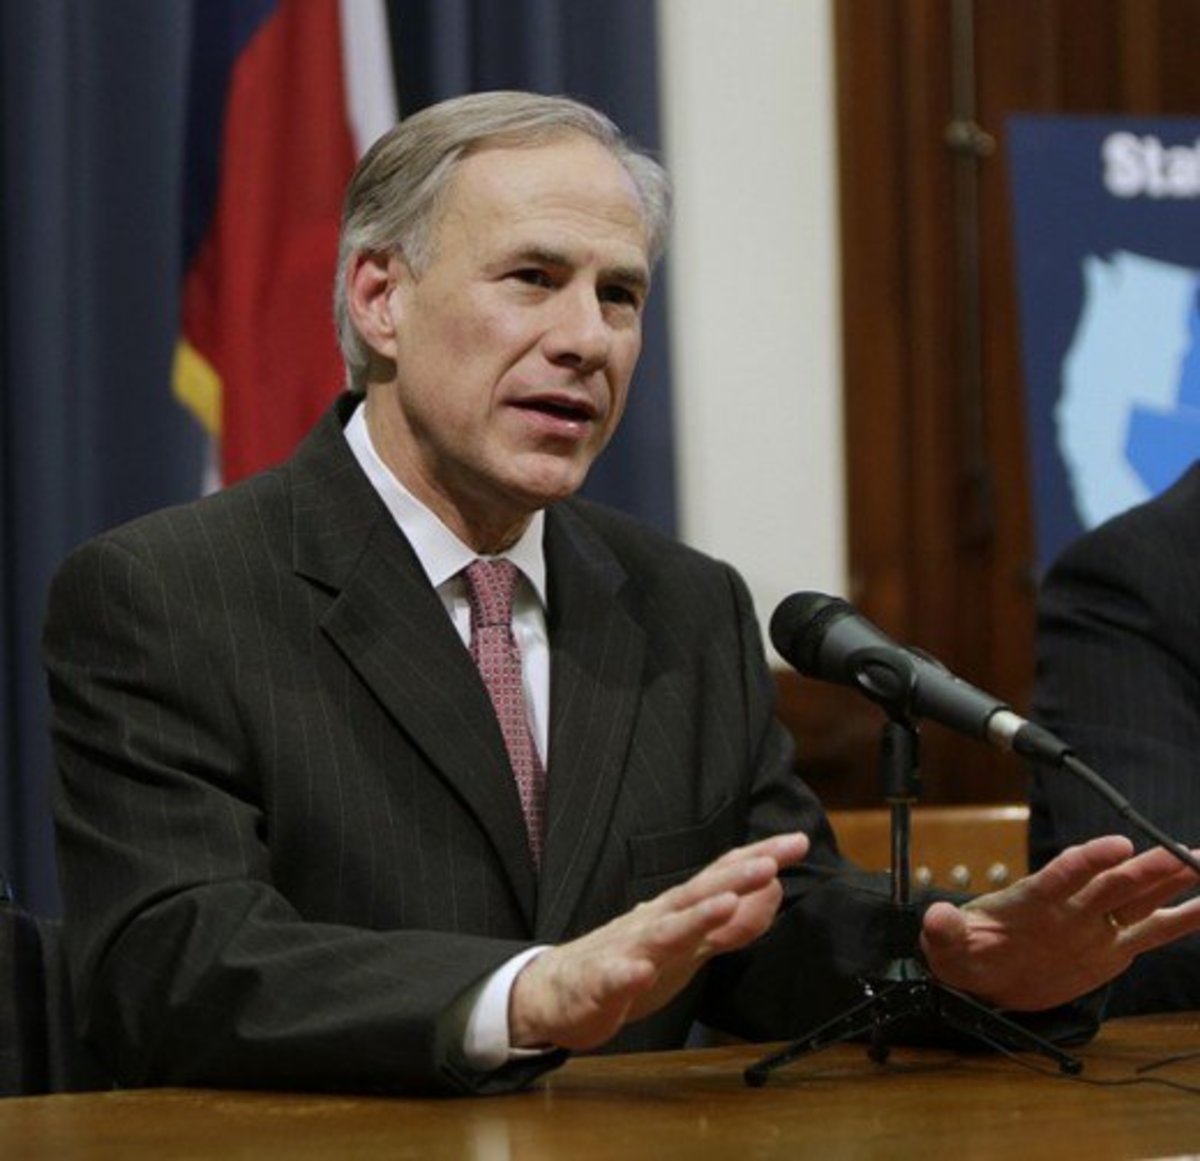 texas-governor-greg-abbott-dispatches-national-guard-to-mexican-border-to-meet-immigration-crisis